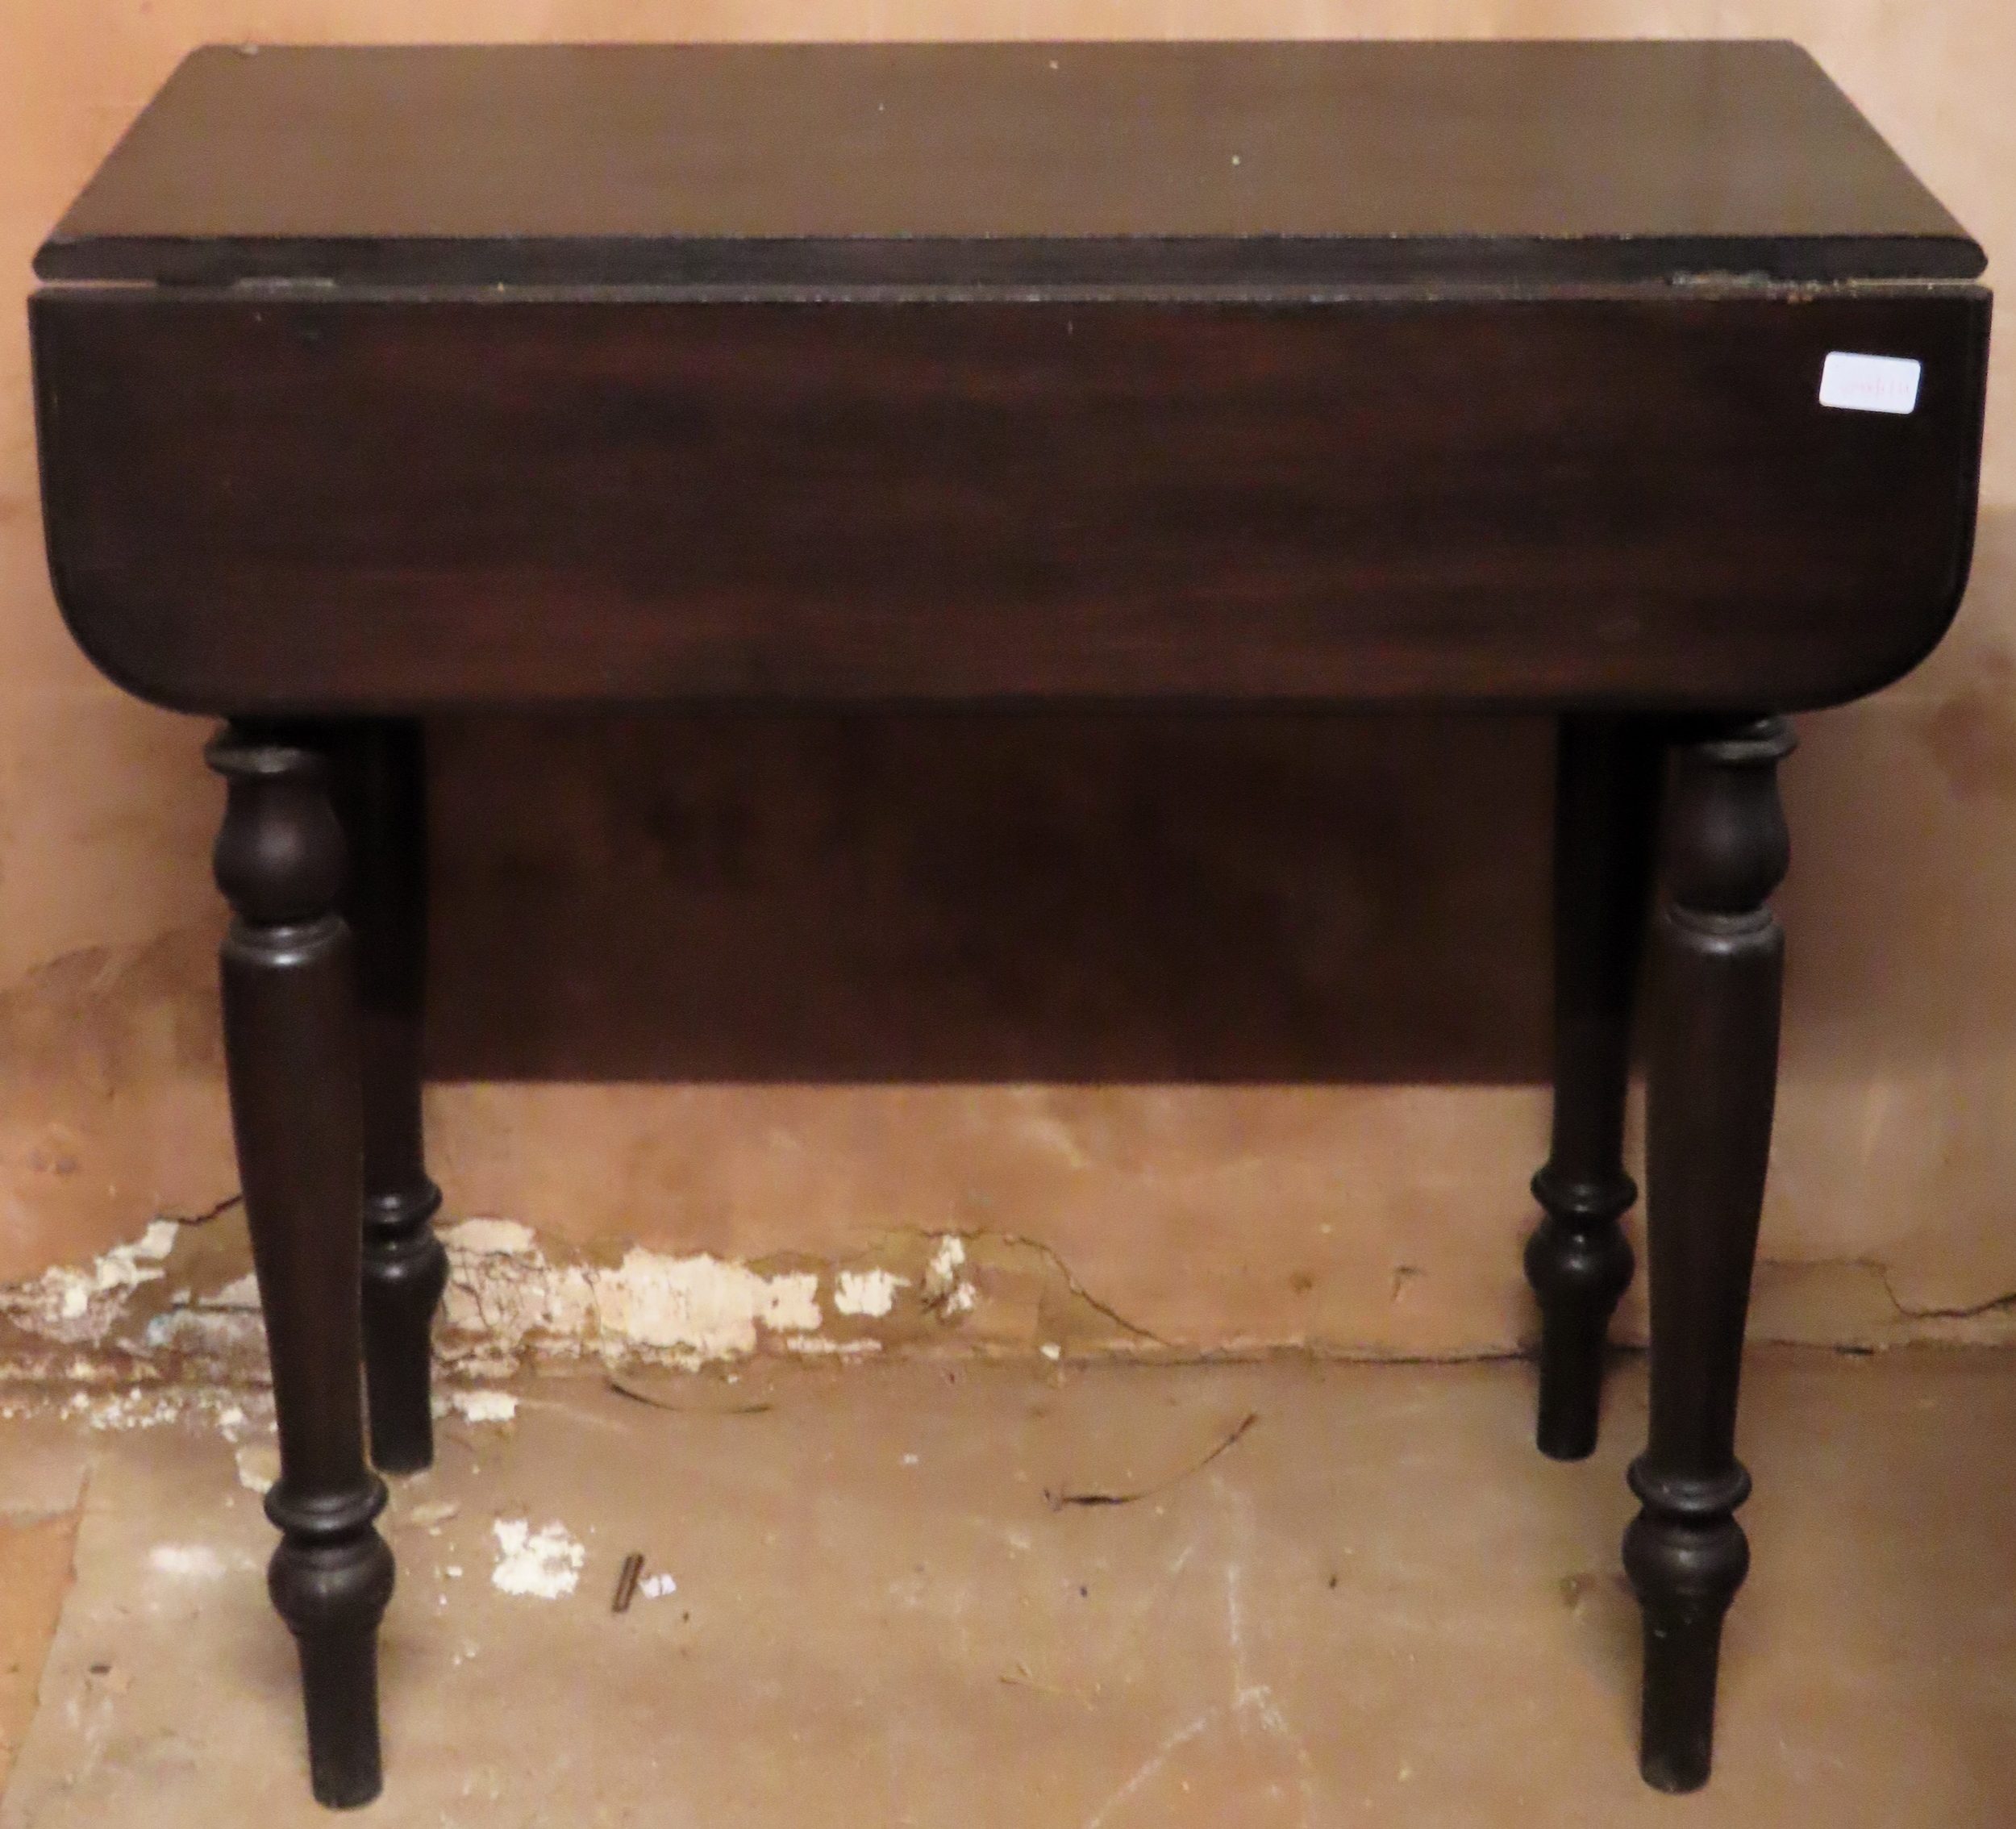 Early 20th century drop leaf table. Approx. 75cm H x 78cm W x 40cm D Used condition, scuffs and